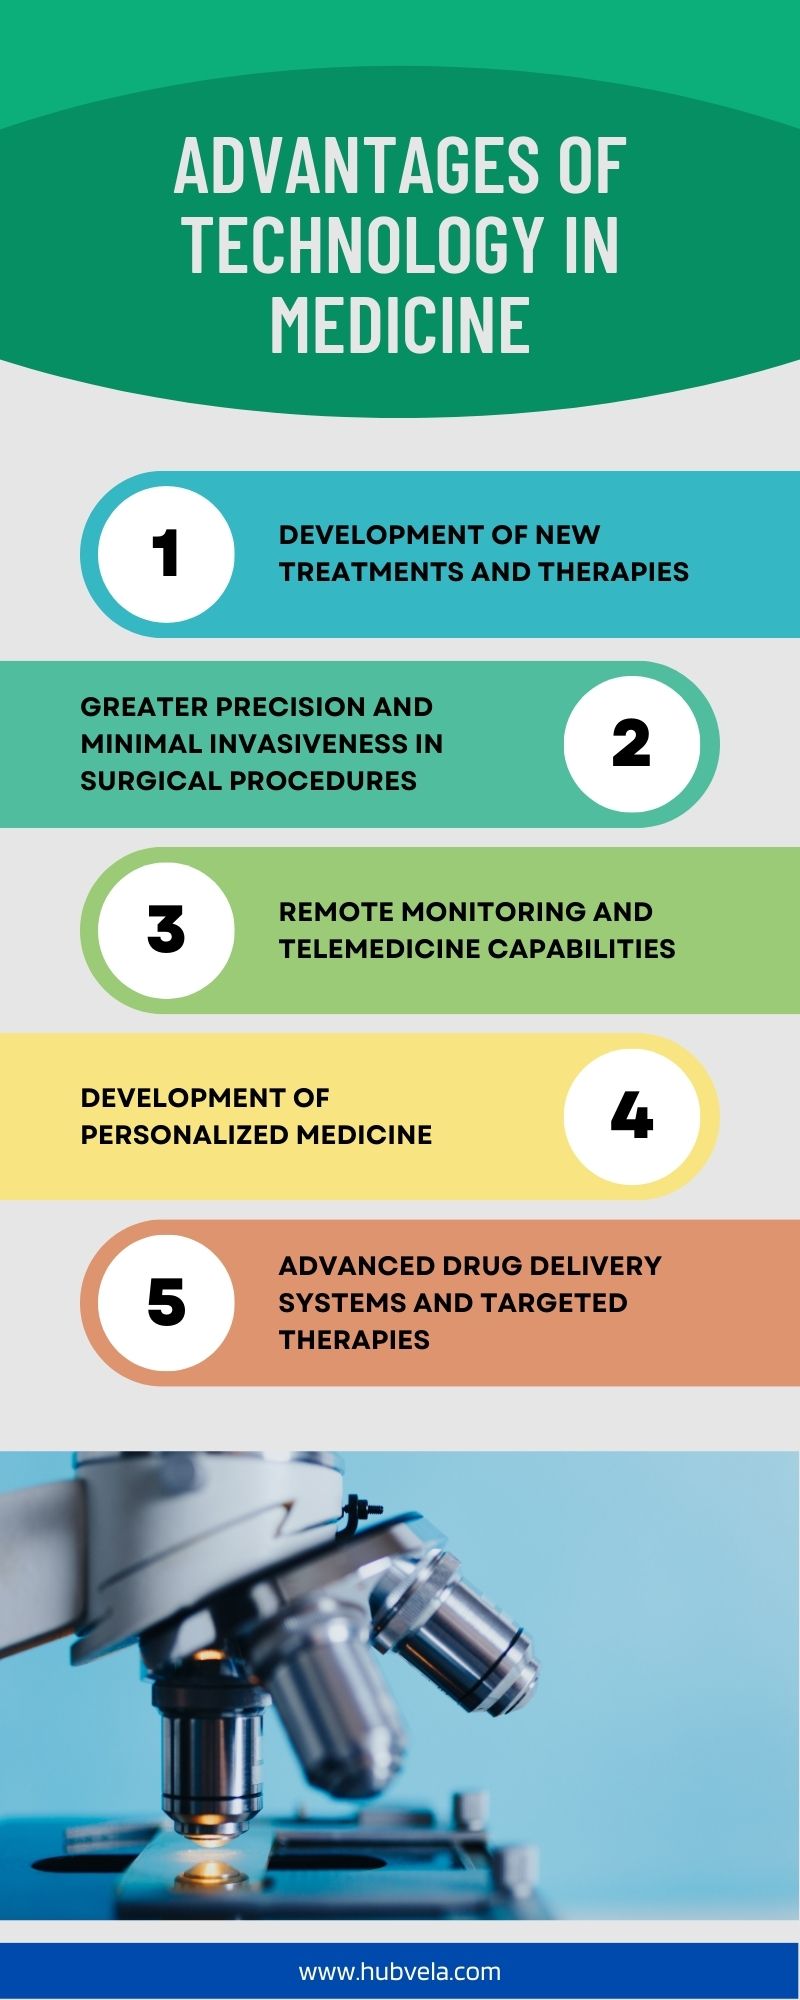 Advantages of Technology in Medicine Infographic